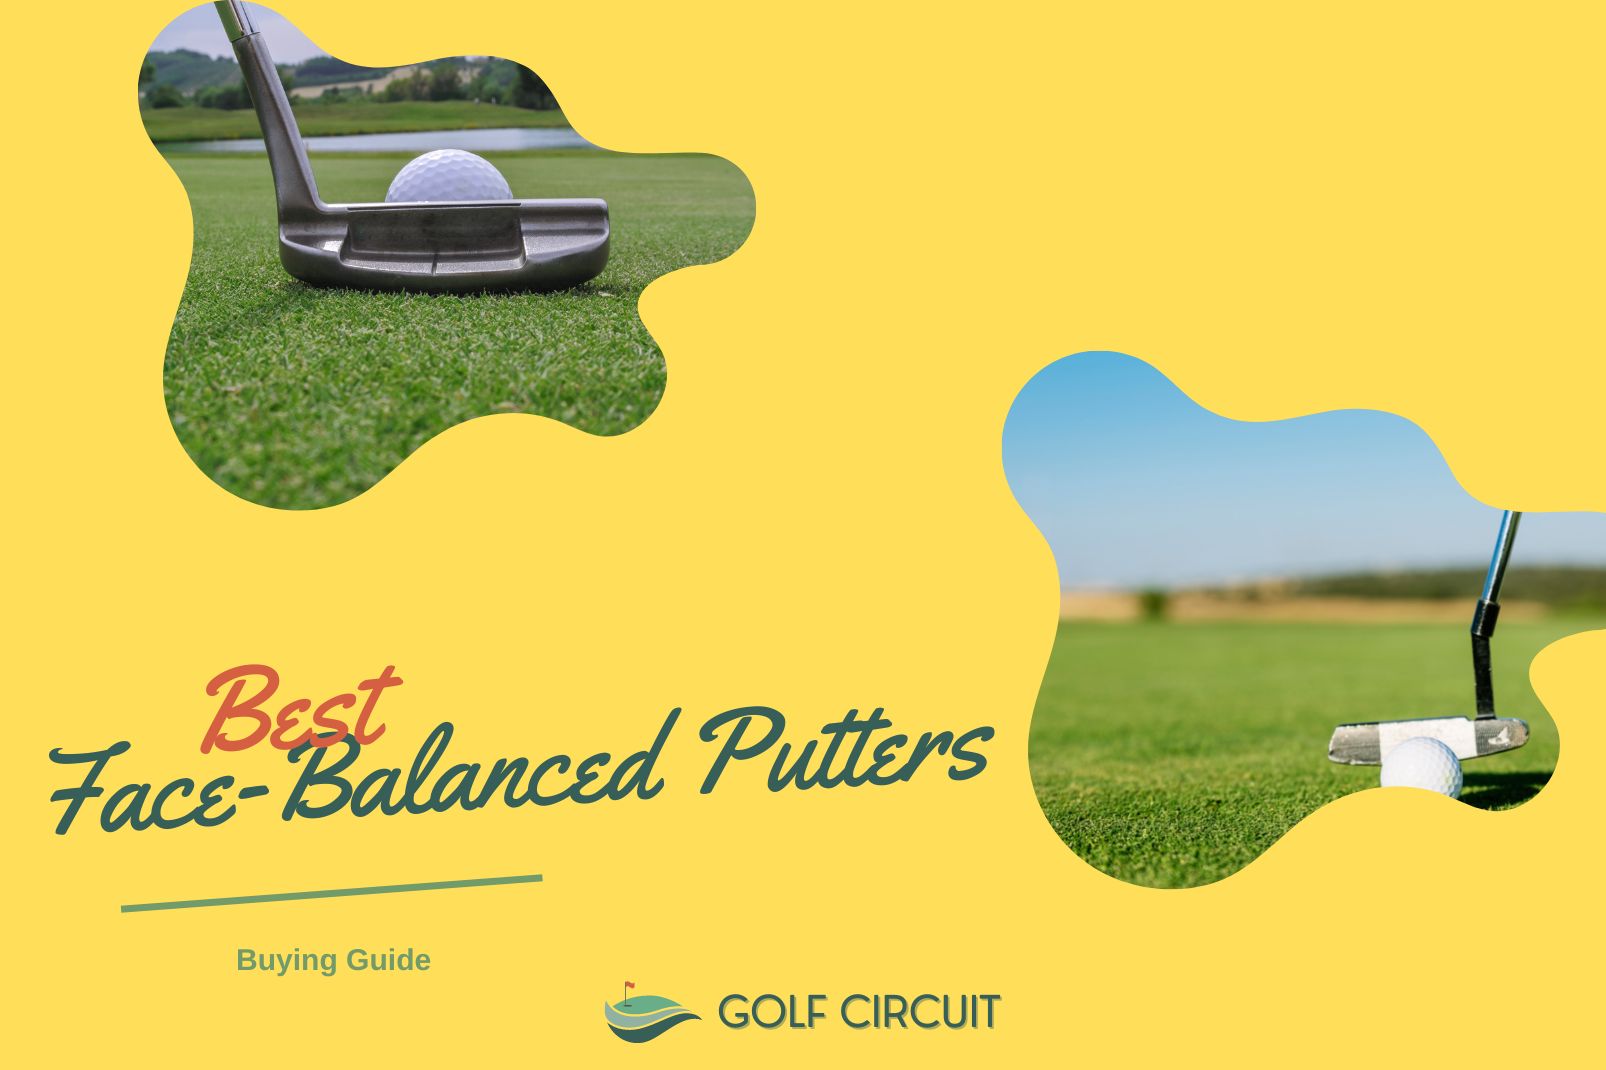 best face balanced putters we tested